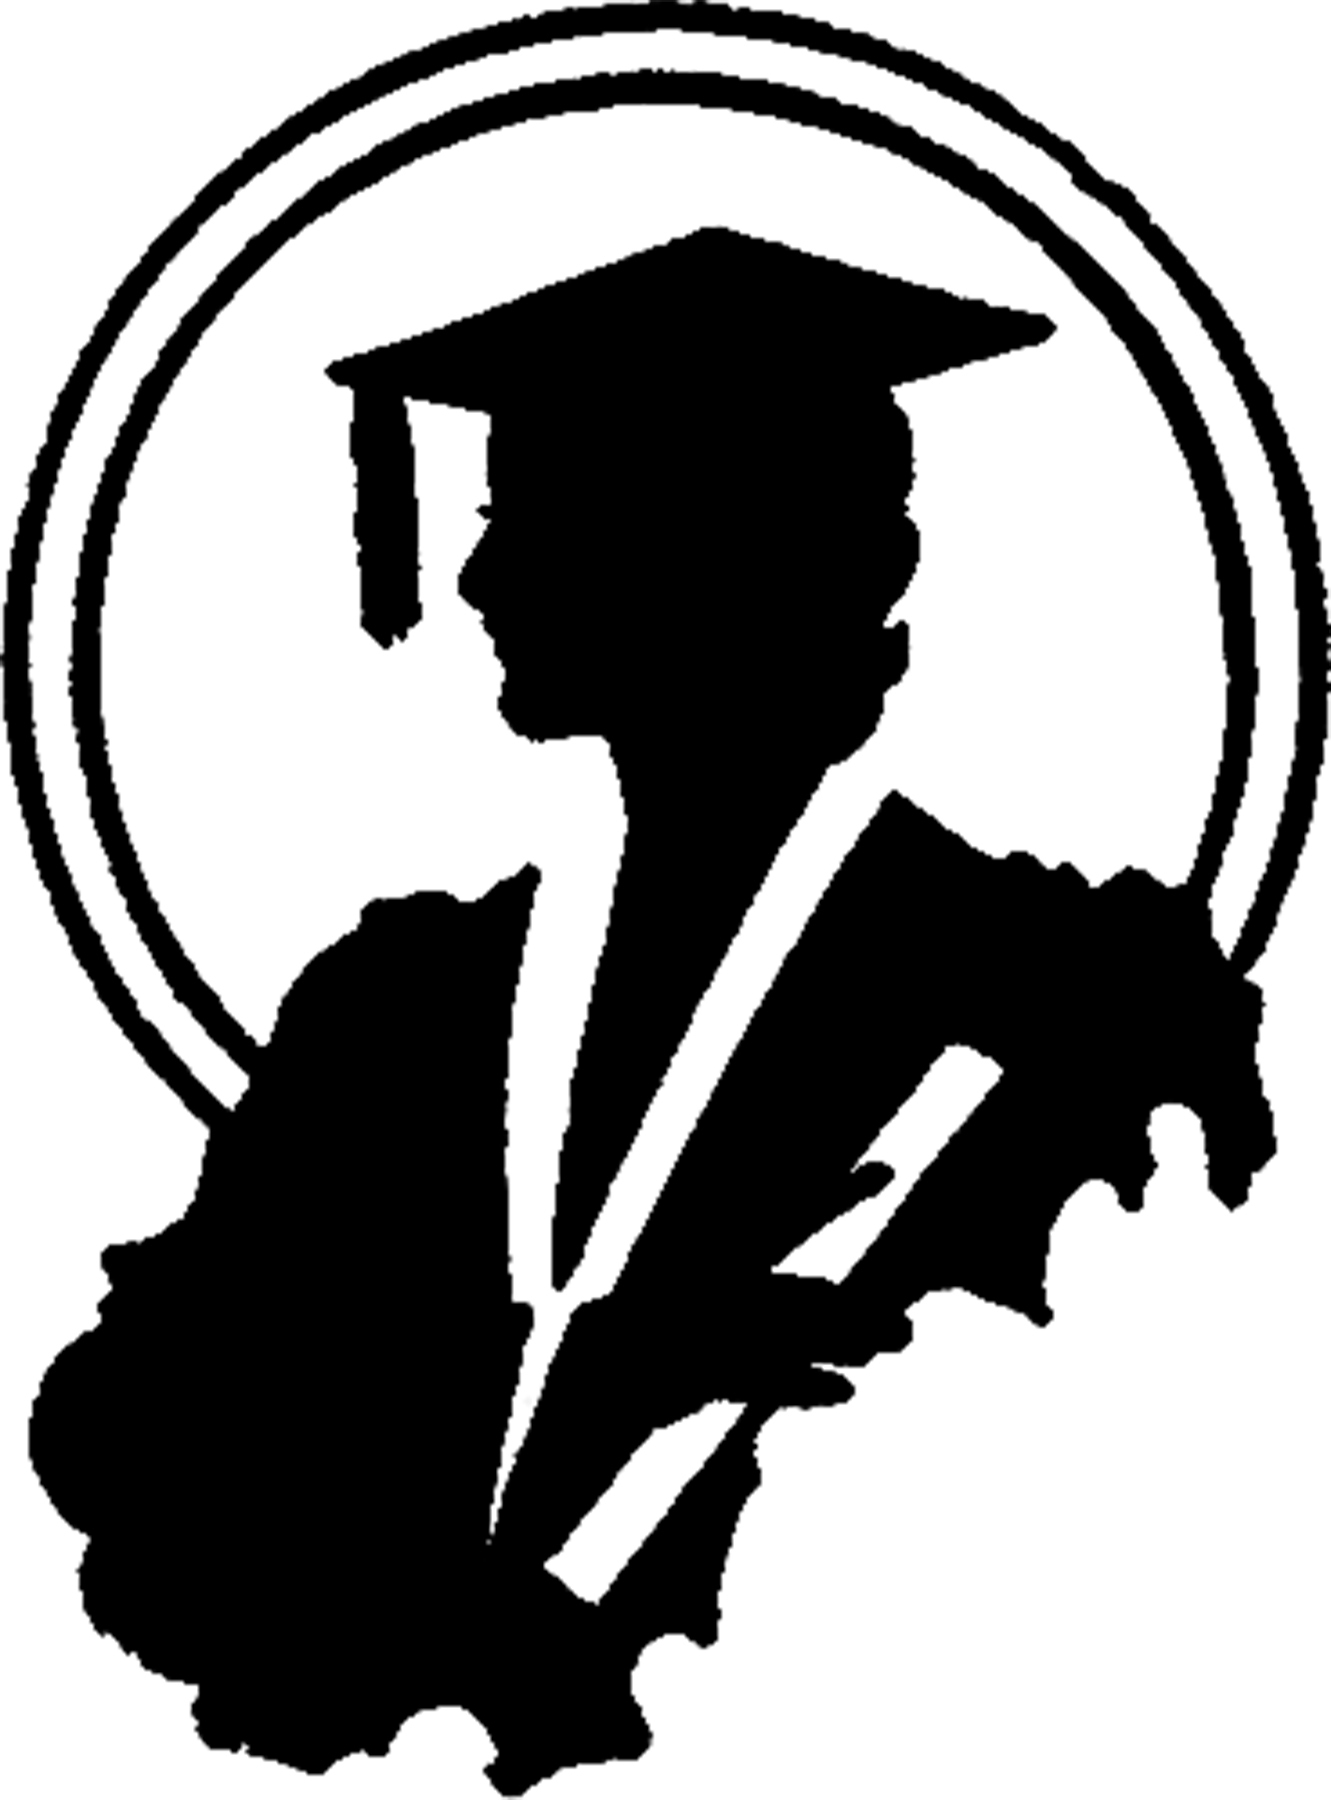 Graduation Silhouette Image - Young Lady! - The Graphics Fairy